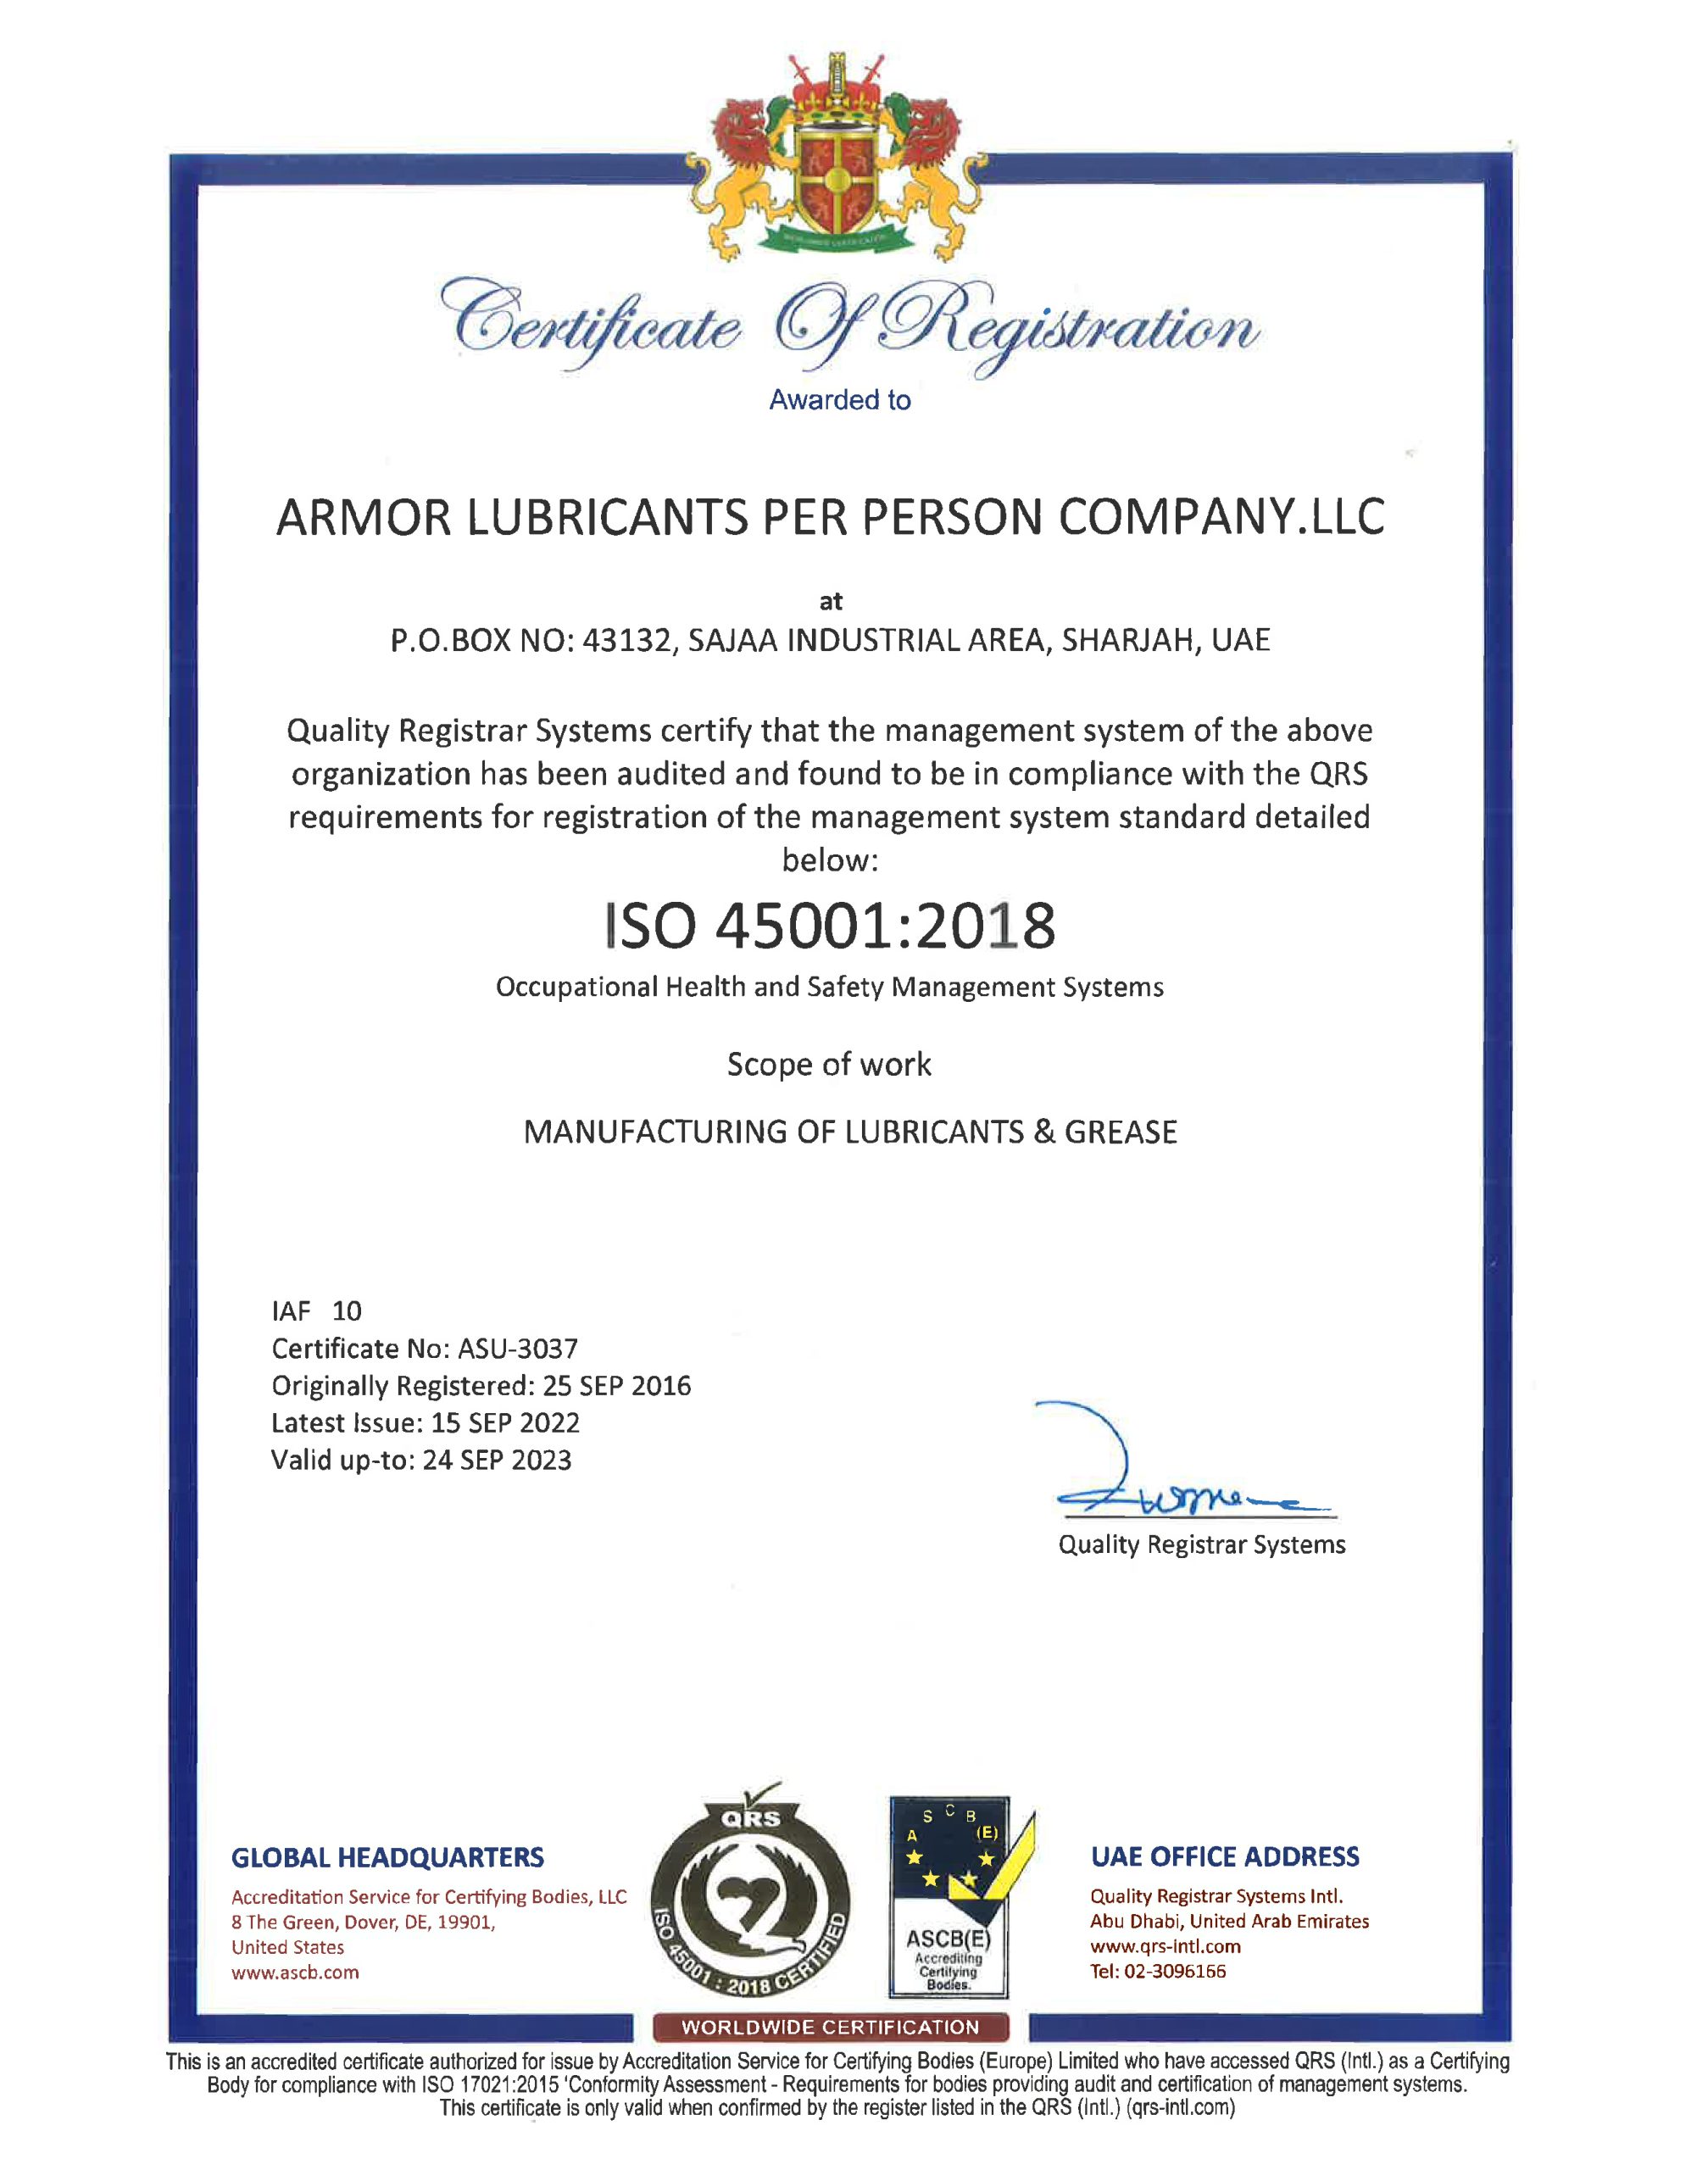 Armor Lubricants ISO 45001 Occupational Health and Safety (OH&S) Management System Certification